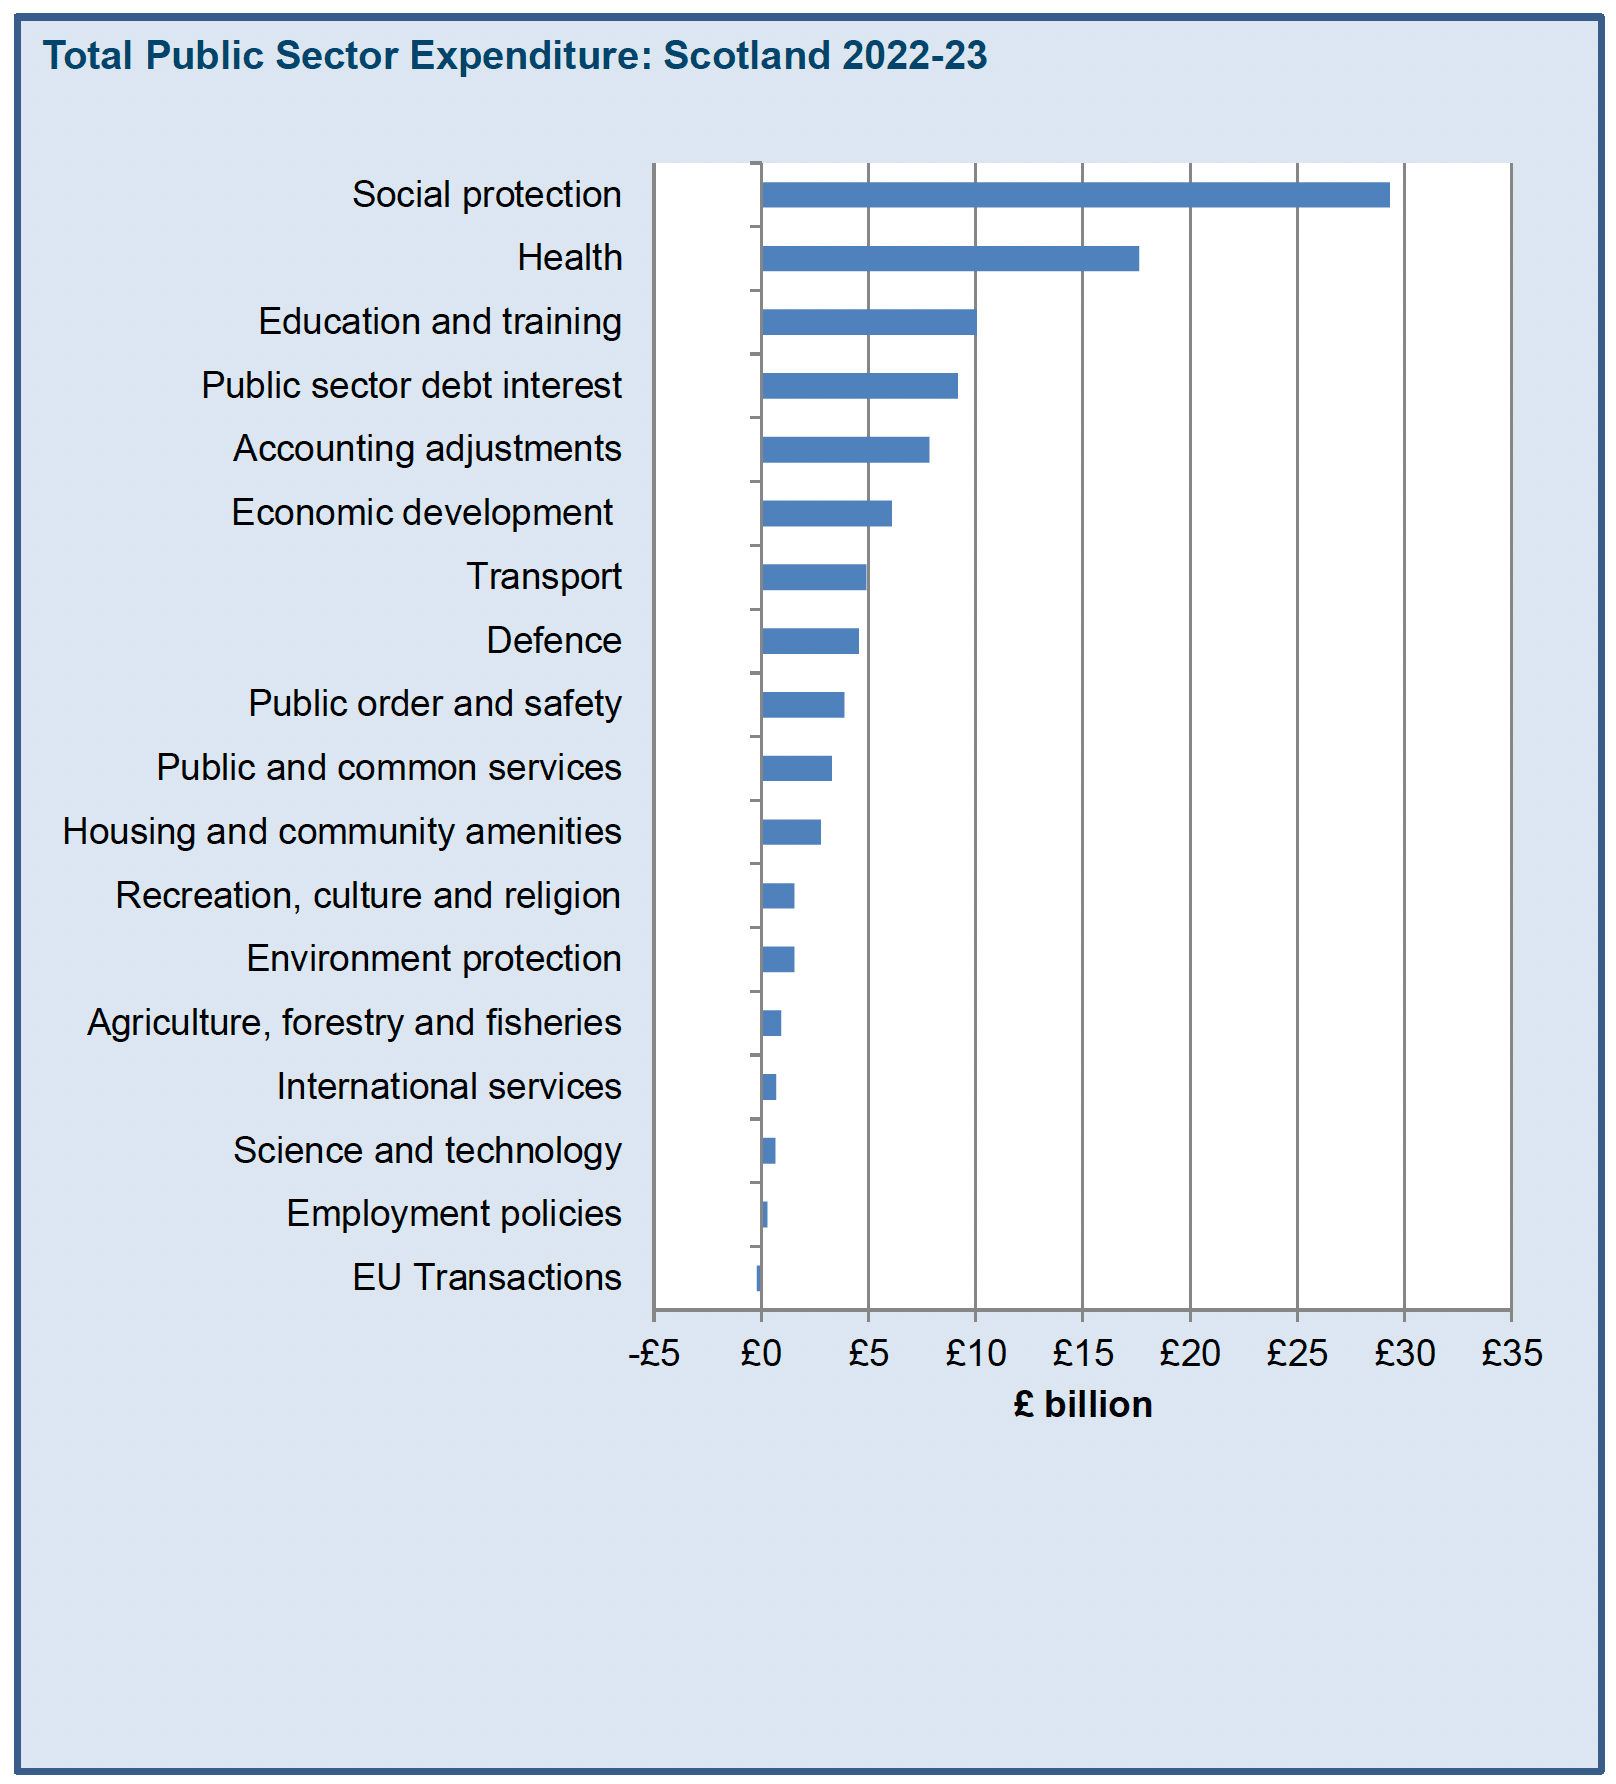 A breakdown of expenditure by spend type. The largest spend was social protection, around £30 billion, followed by health at around £18 billion.